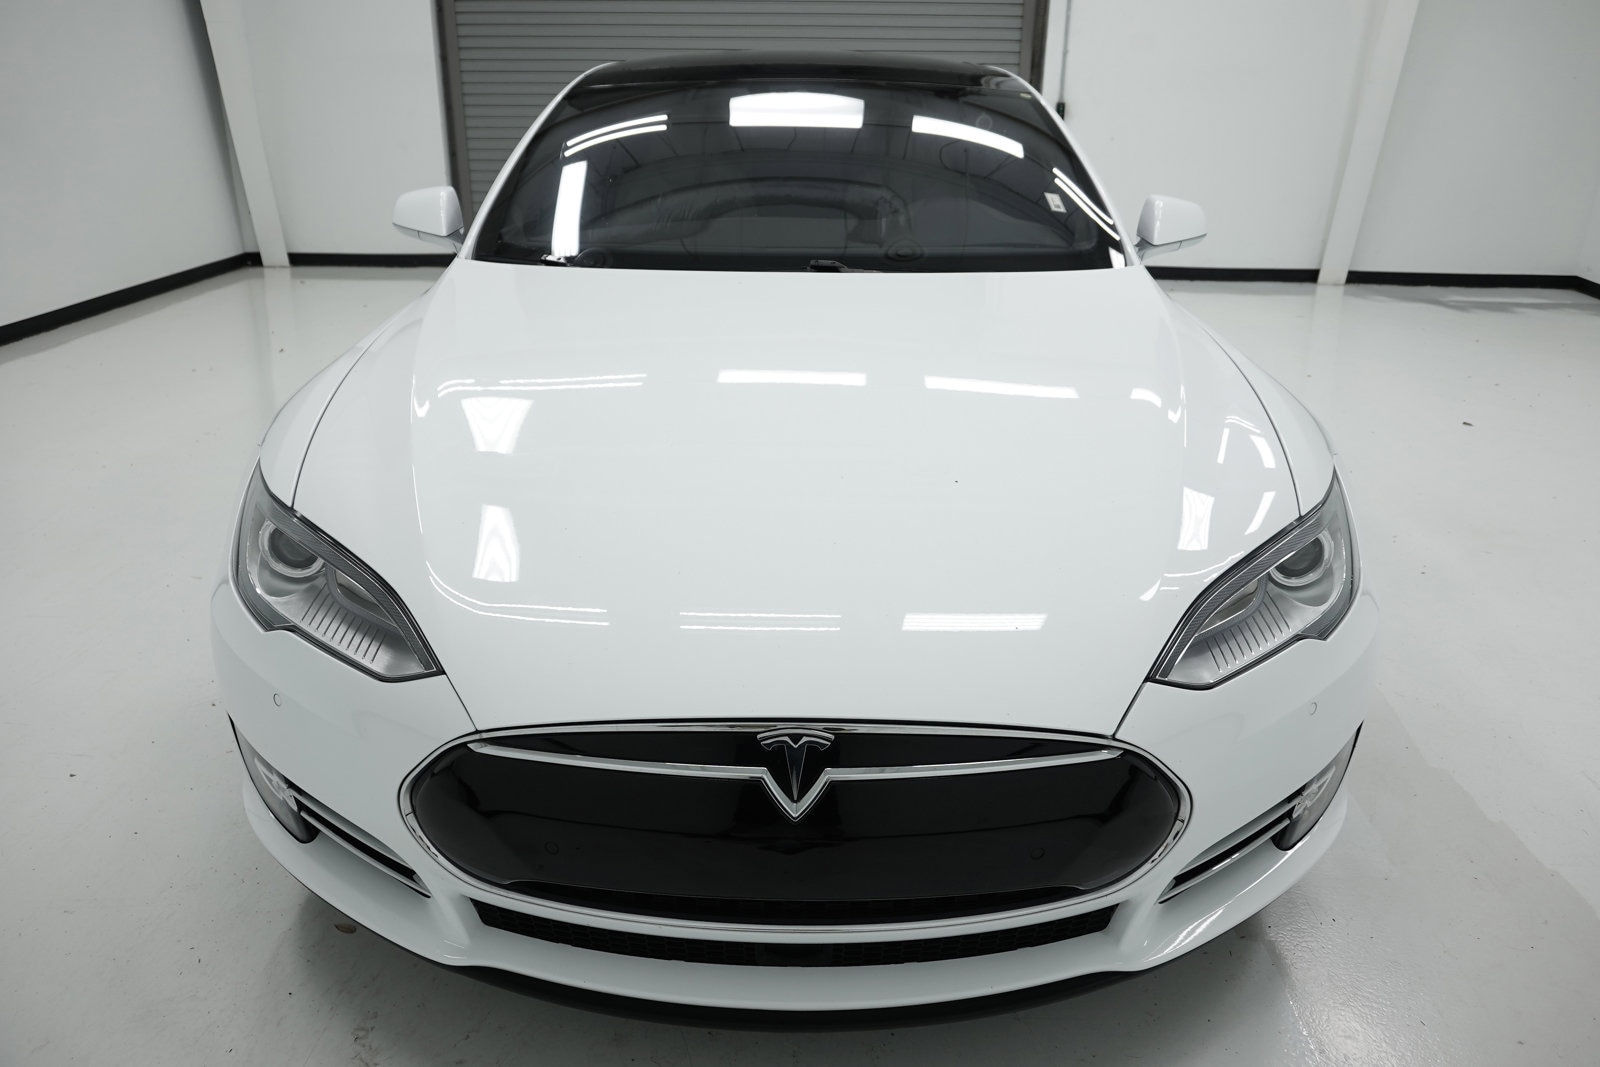 Used 2016 Tesla Model S For Sale at Emmons Autoplex